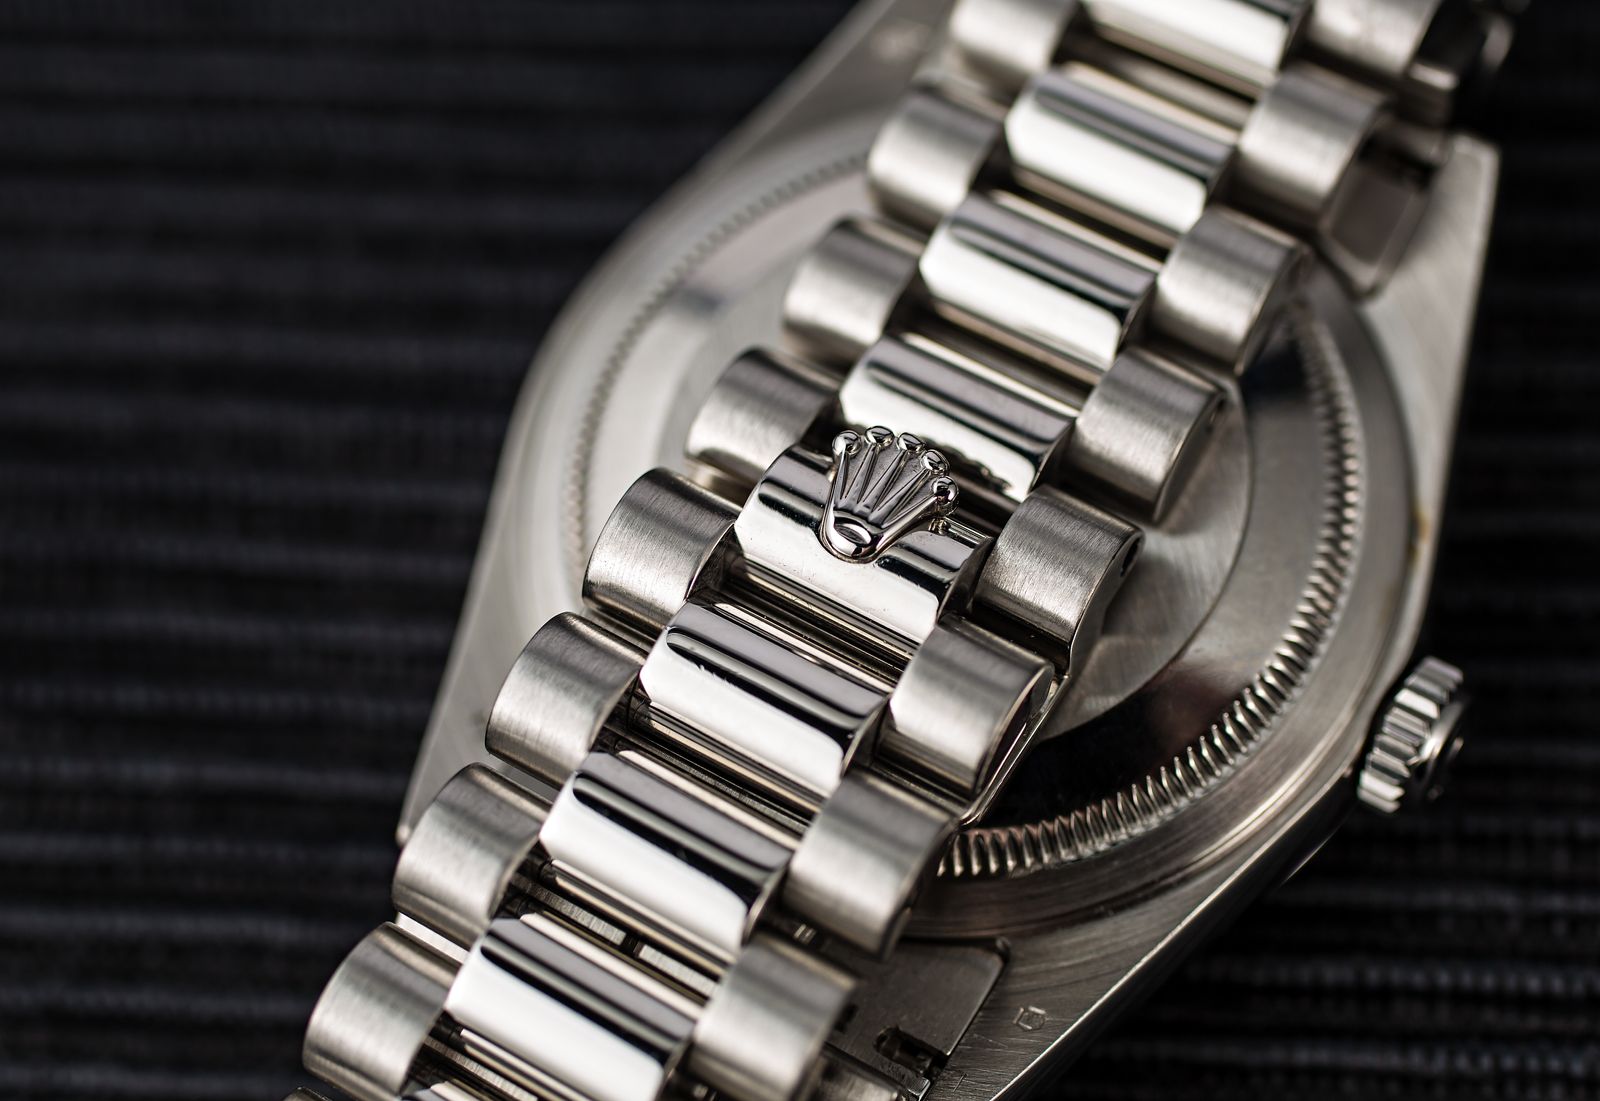 A Guide To The Different Types Of Watch Clasps: How They Work